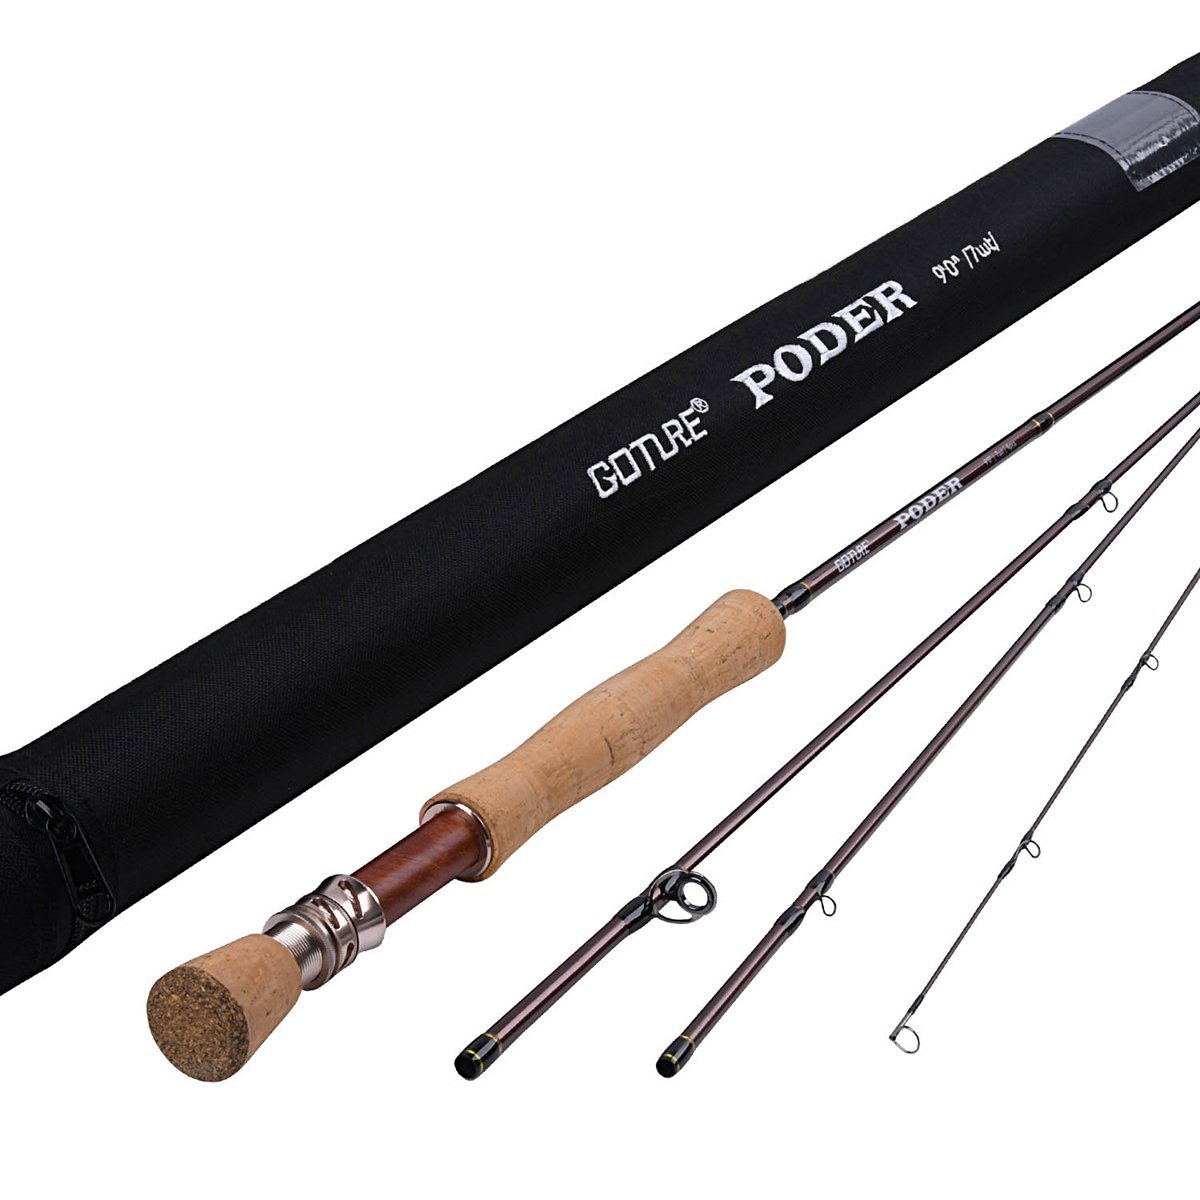 Goture Telescopic Fishing Rods, Baitcaster Rod Compact Pole /24T Carbon Fiber Blank, Fishing Pole Kit Lightweight Easy to Carry, Full Kit with Carrier